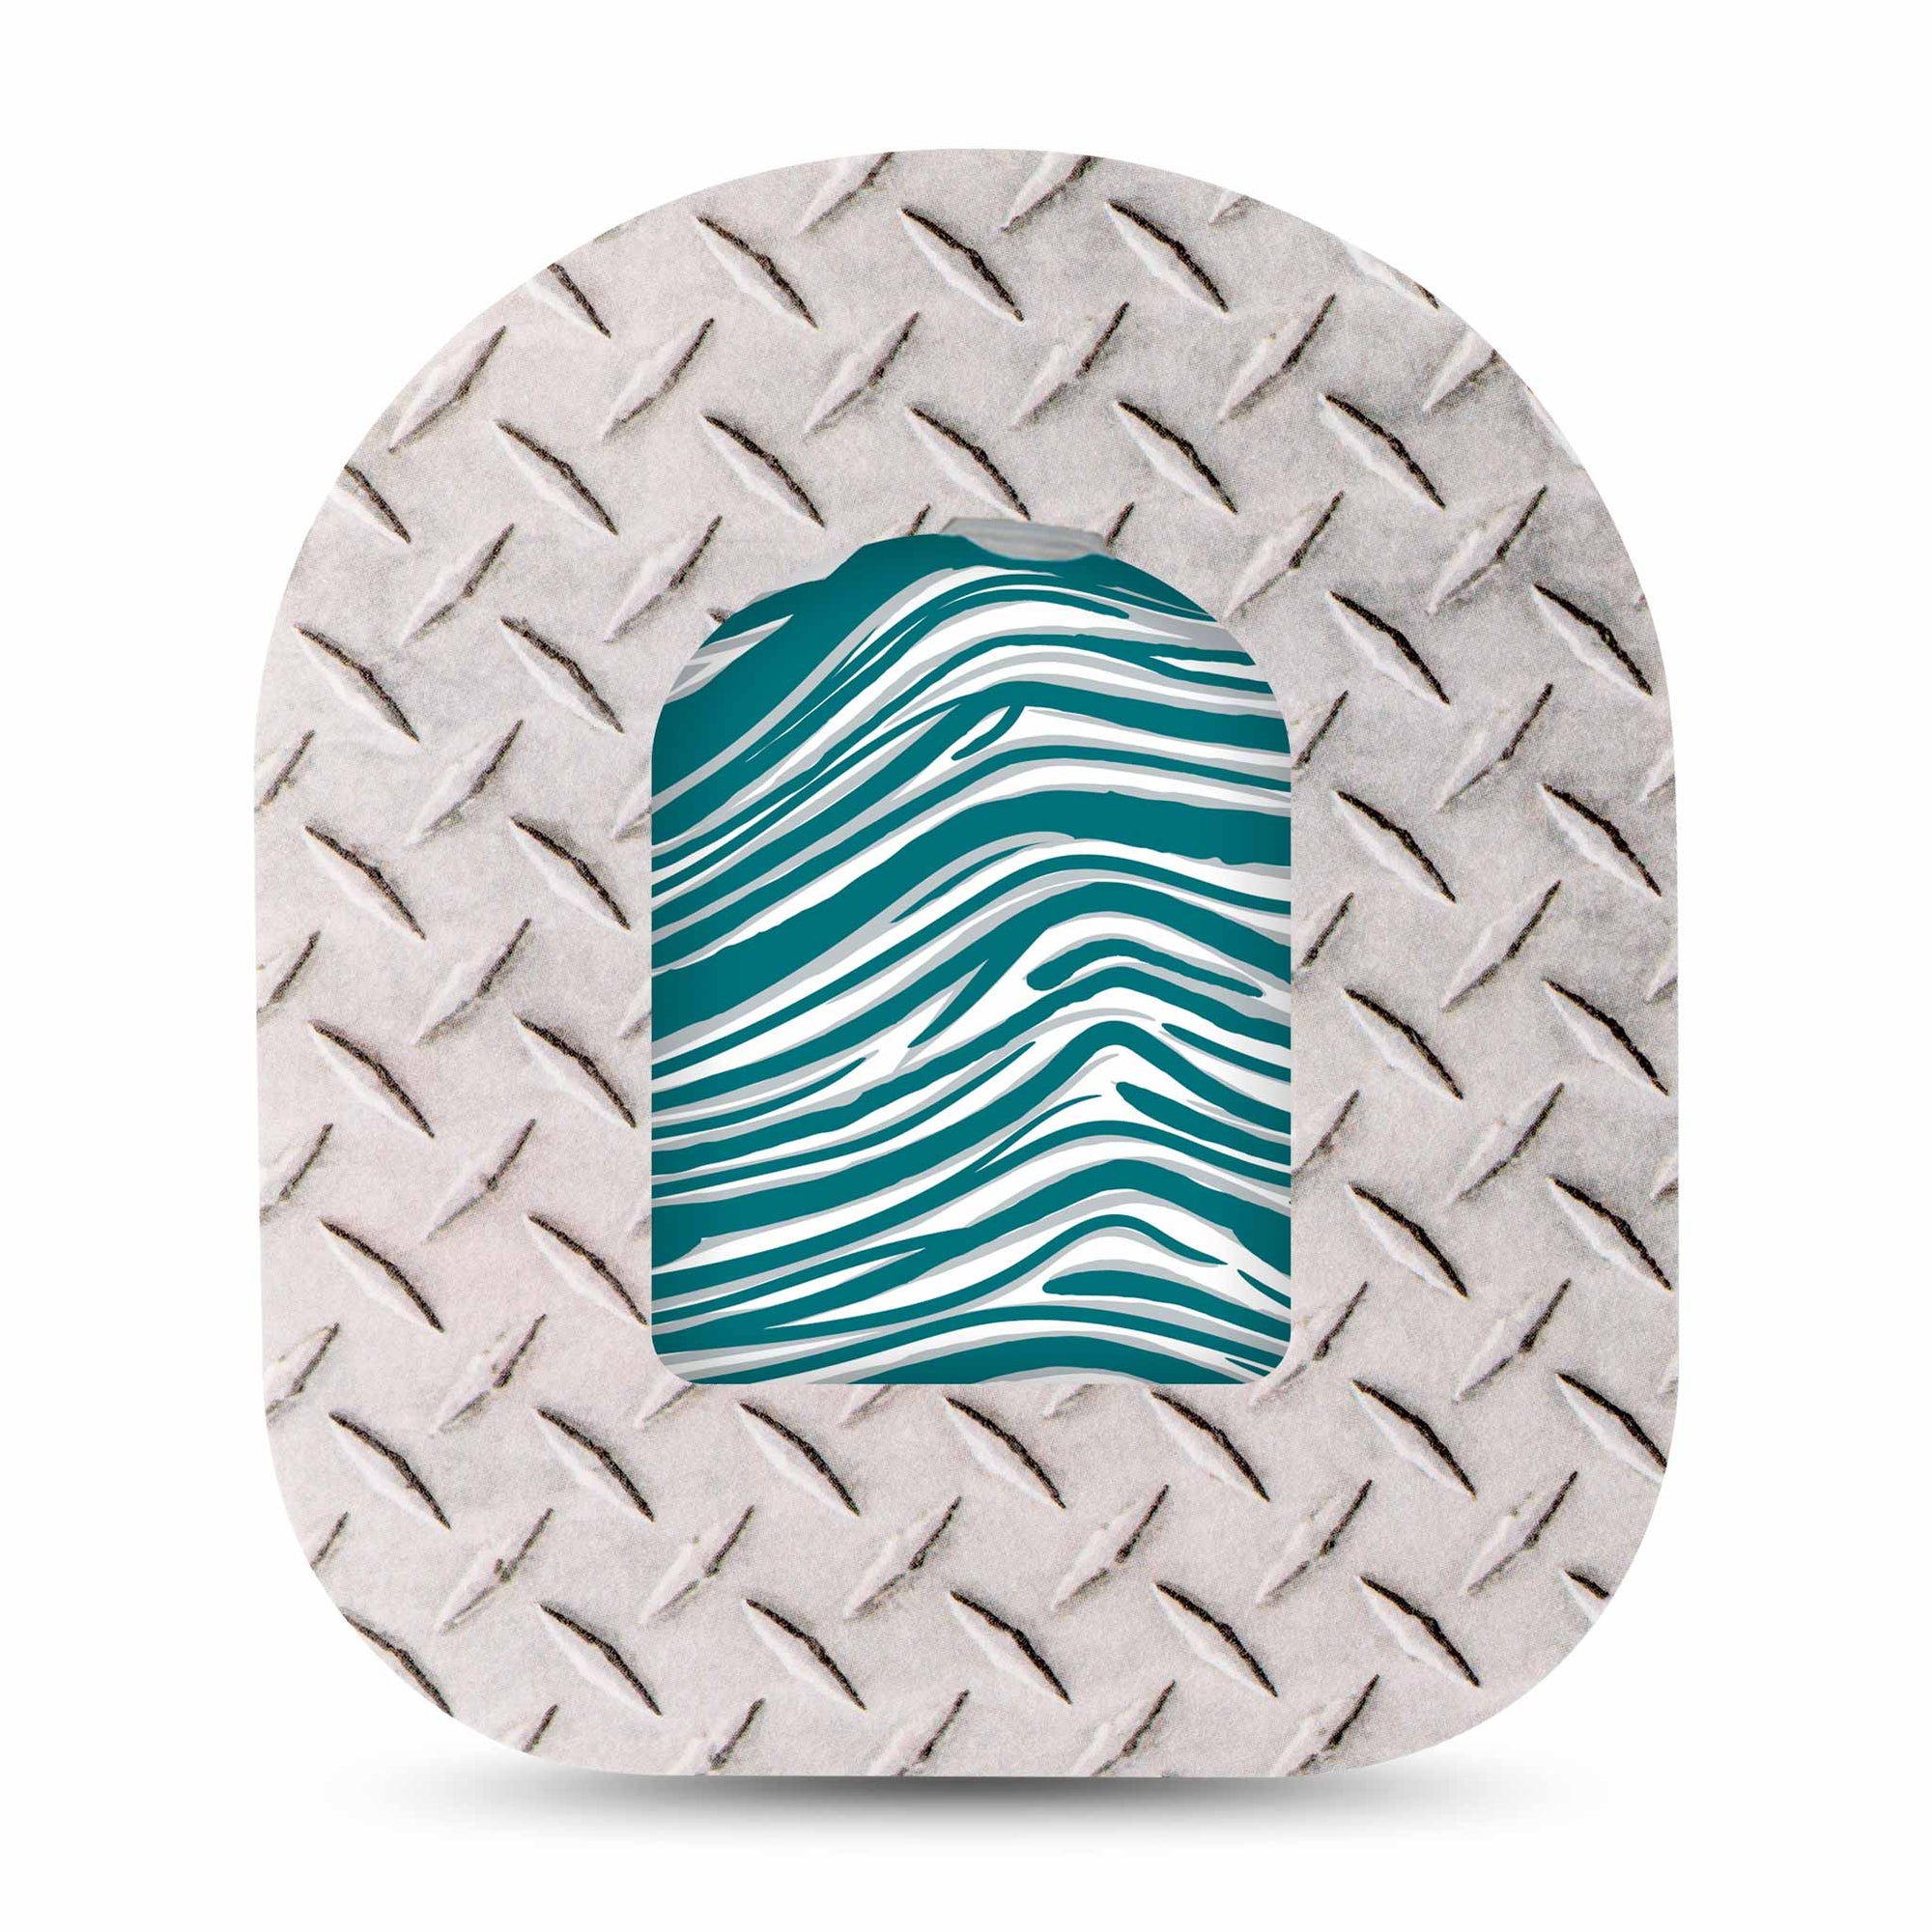 ExpressionMed Green and Silver Eagles Team Spirit Pod Sticker and Grid Iron Patch